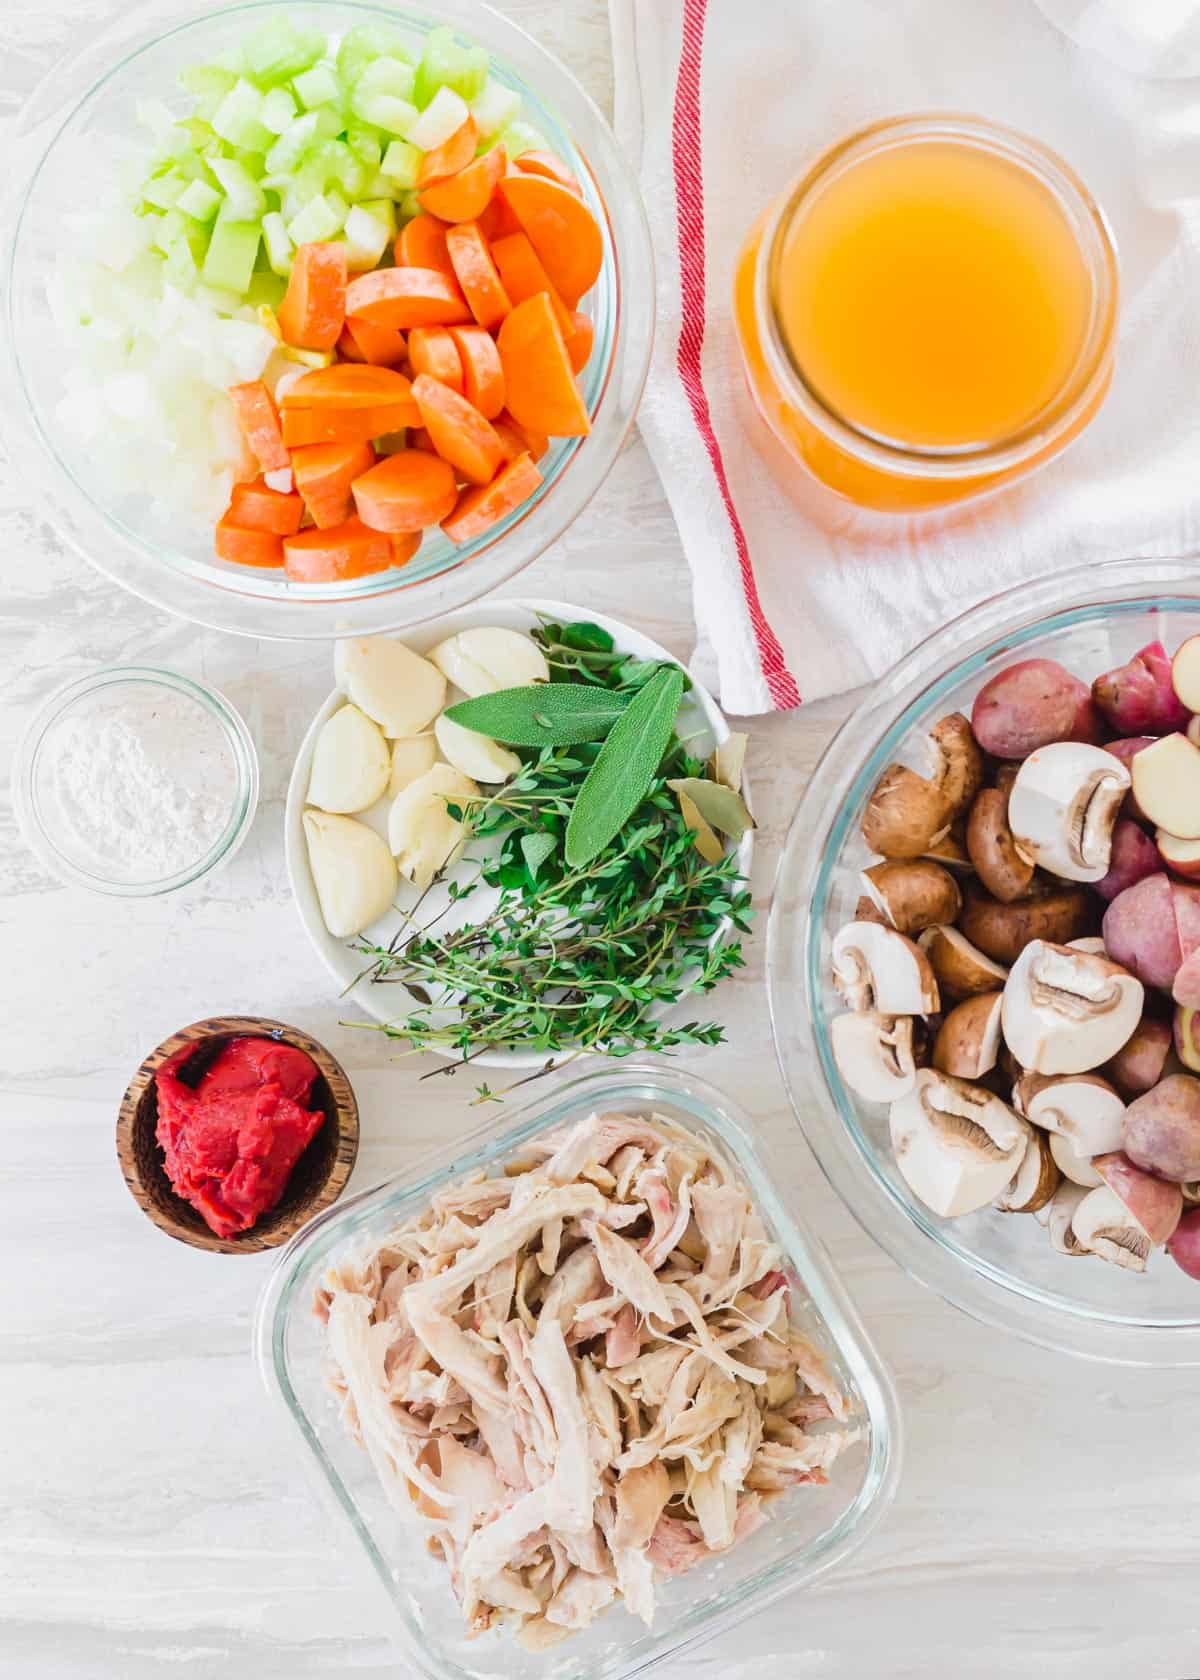 Ingredients to make turkey stew including red baby potatoes, mushrooms, tomato paste, garlic, fresh herbs, carrots, celery, onion, stock and shredded turkey.